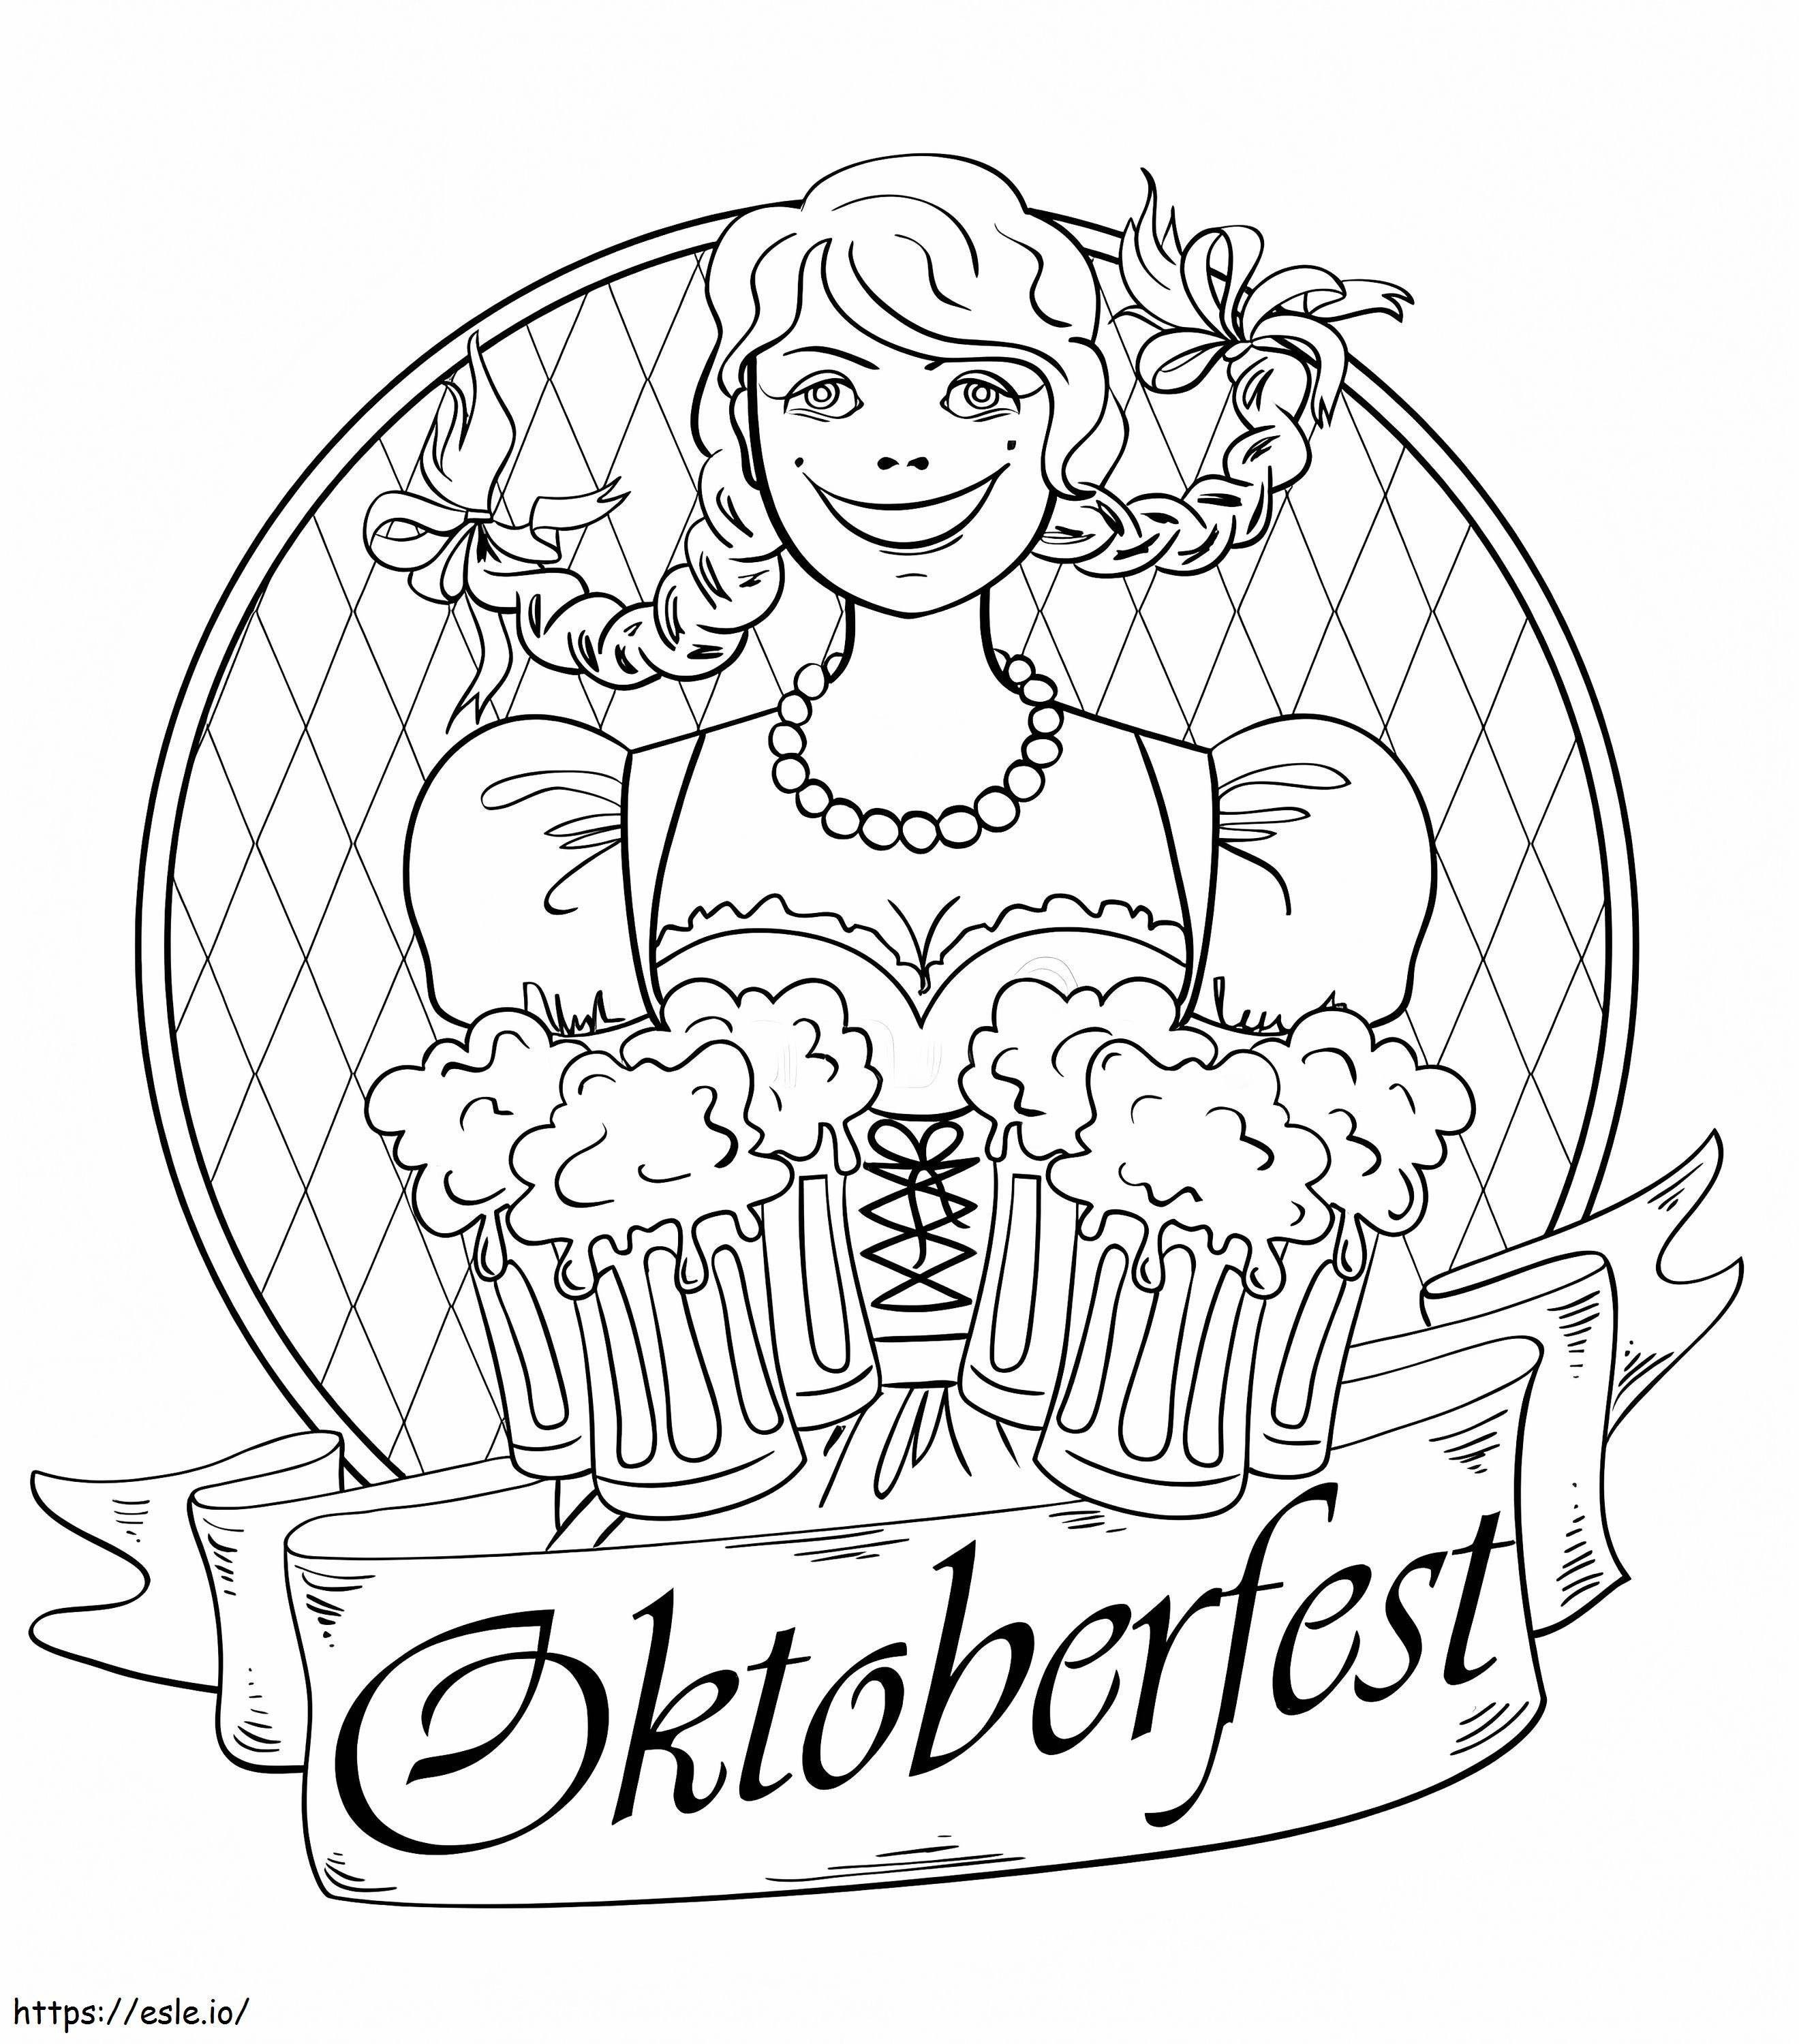 Oktoberfest 1 coloring page